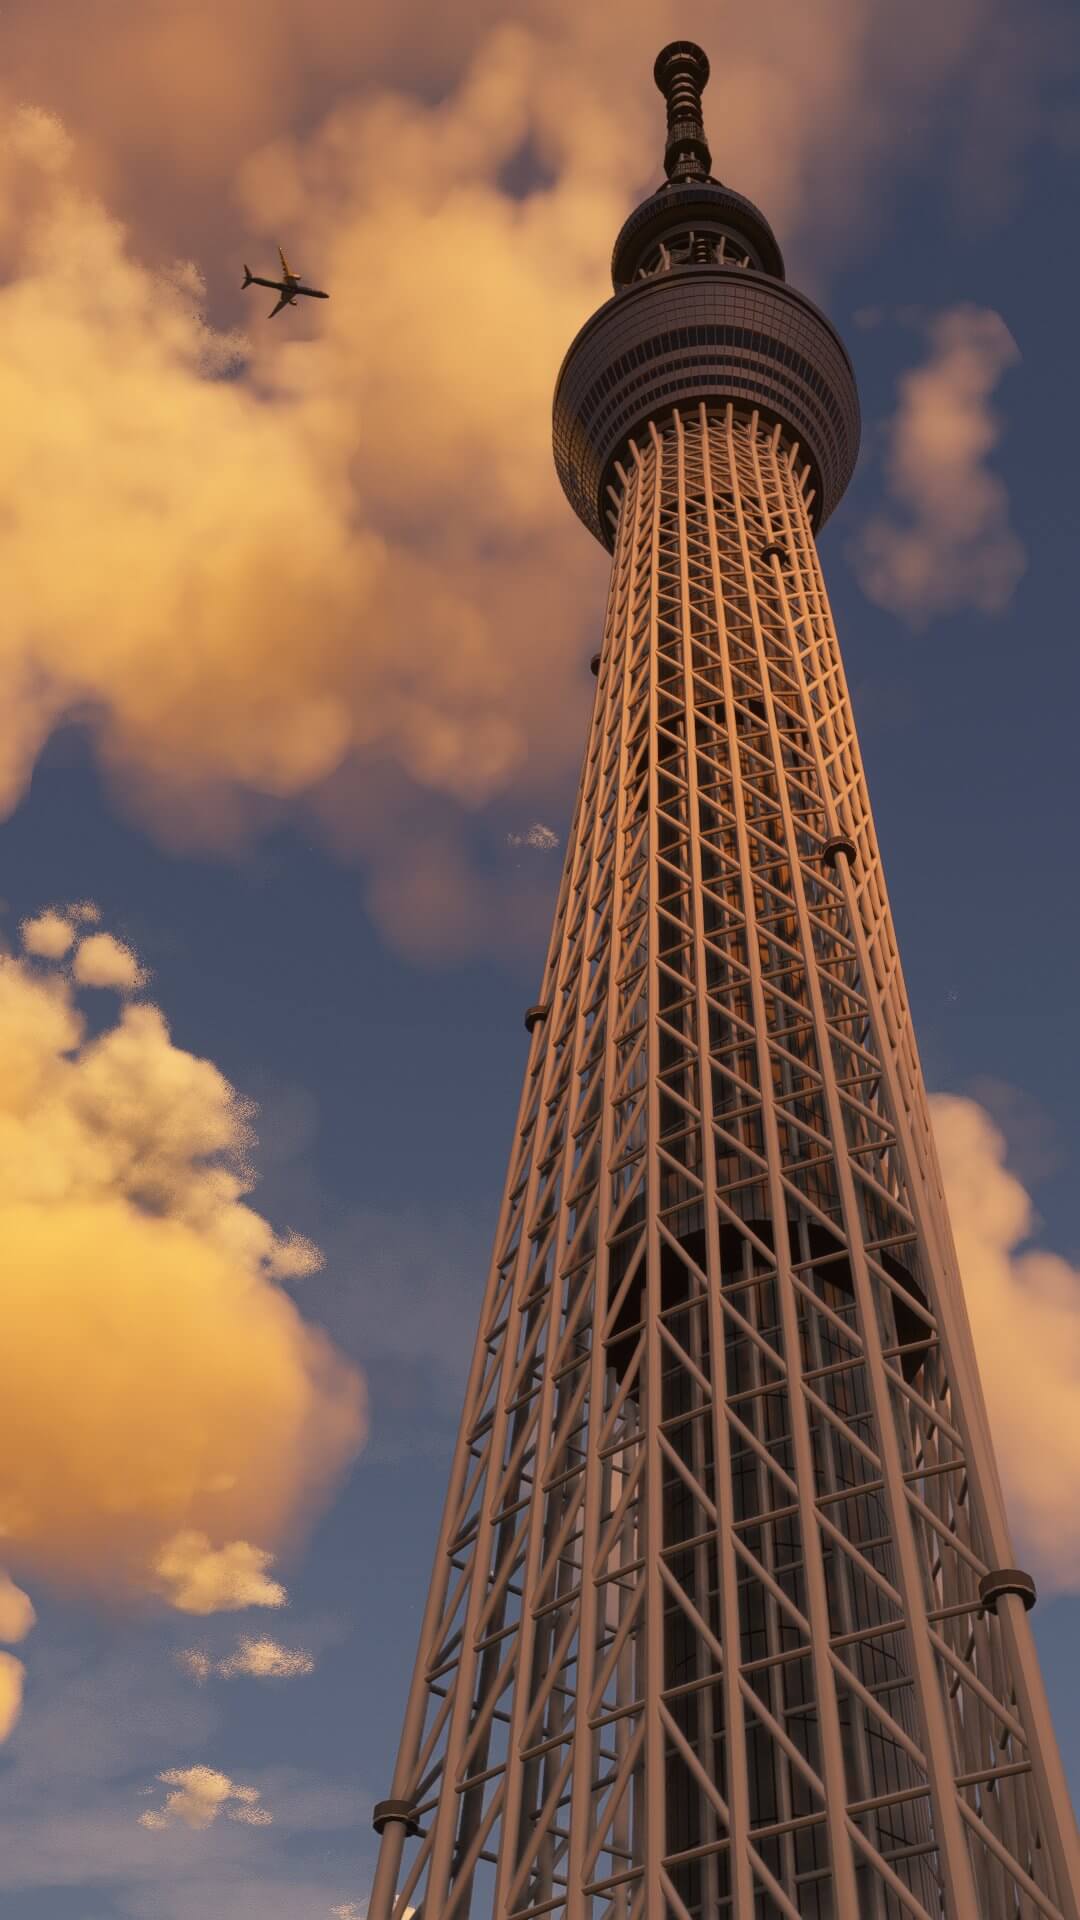 A tall tower rises up, with a plane visible high in the blue cloudy sky above it.